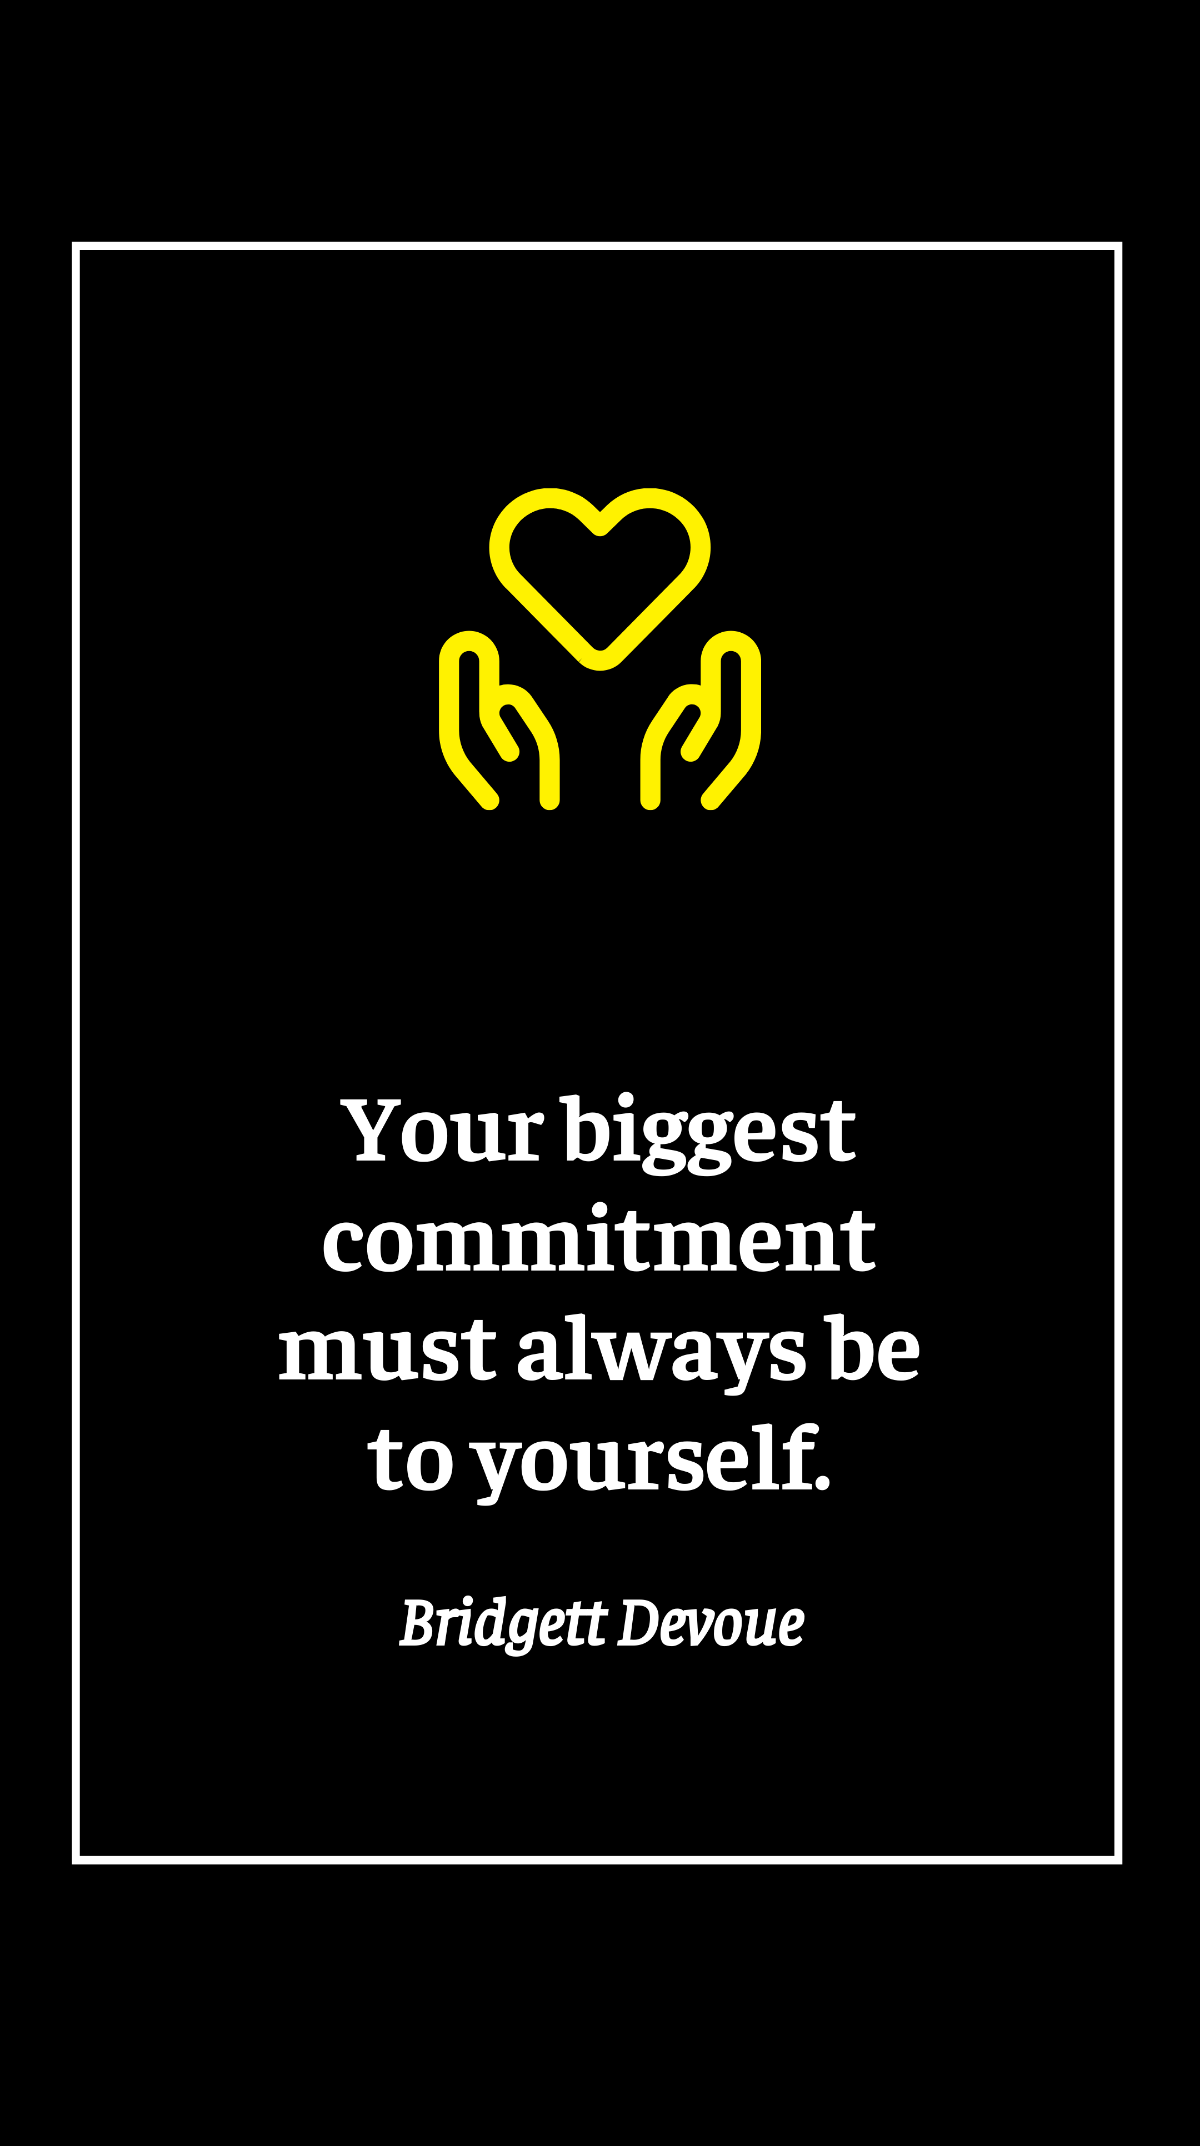 Free Bridgett Devoue - Your biggest commitment must always be to yourself. Template